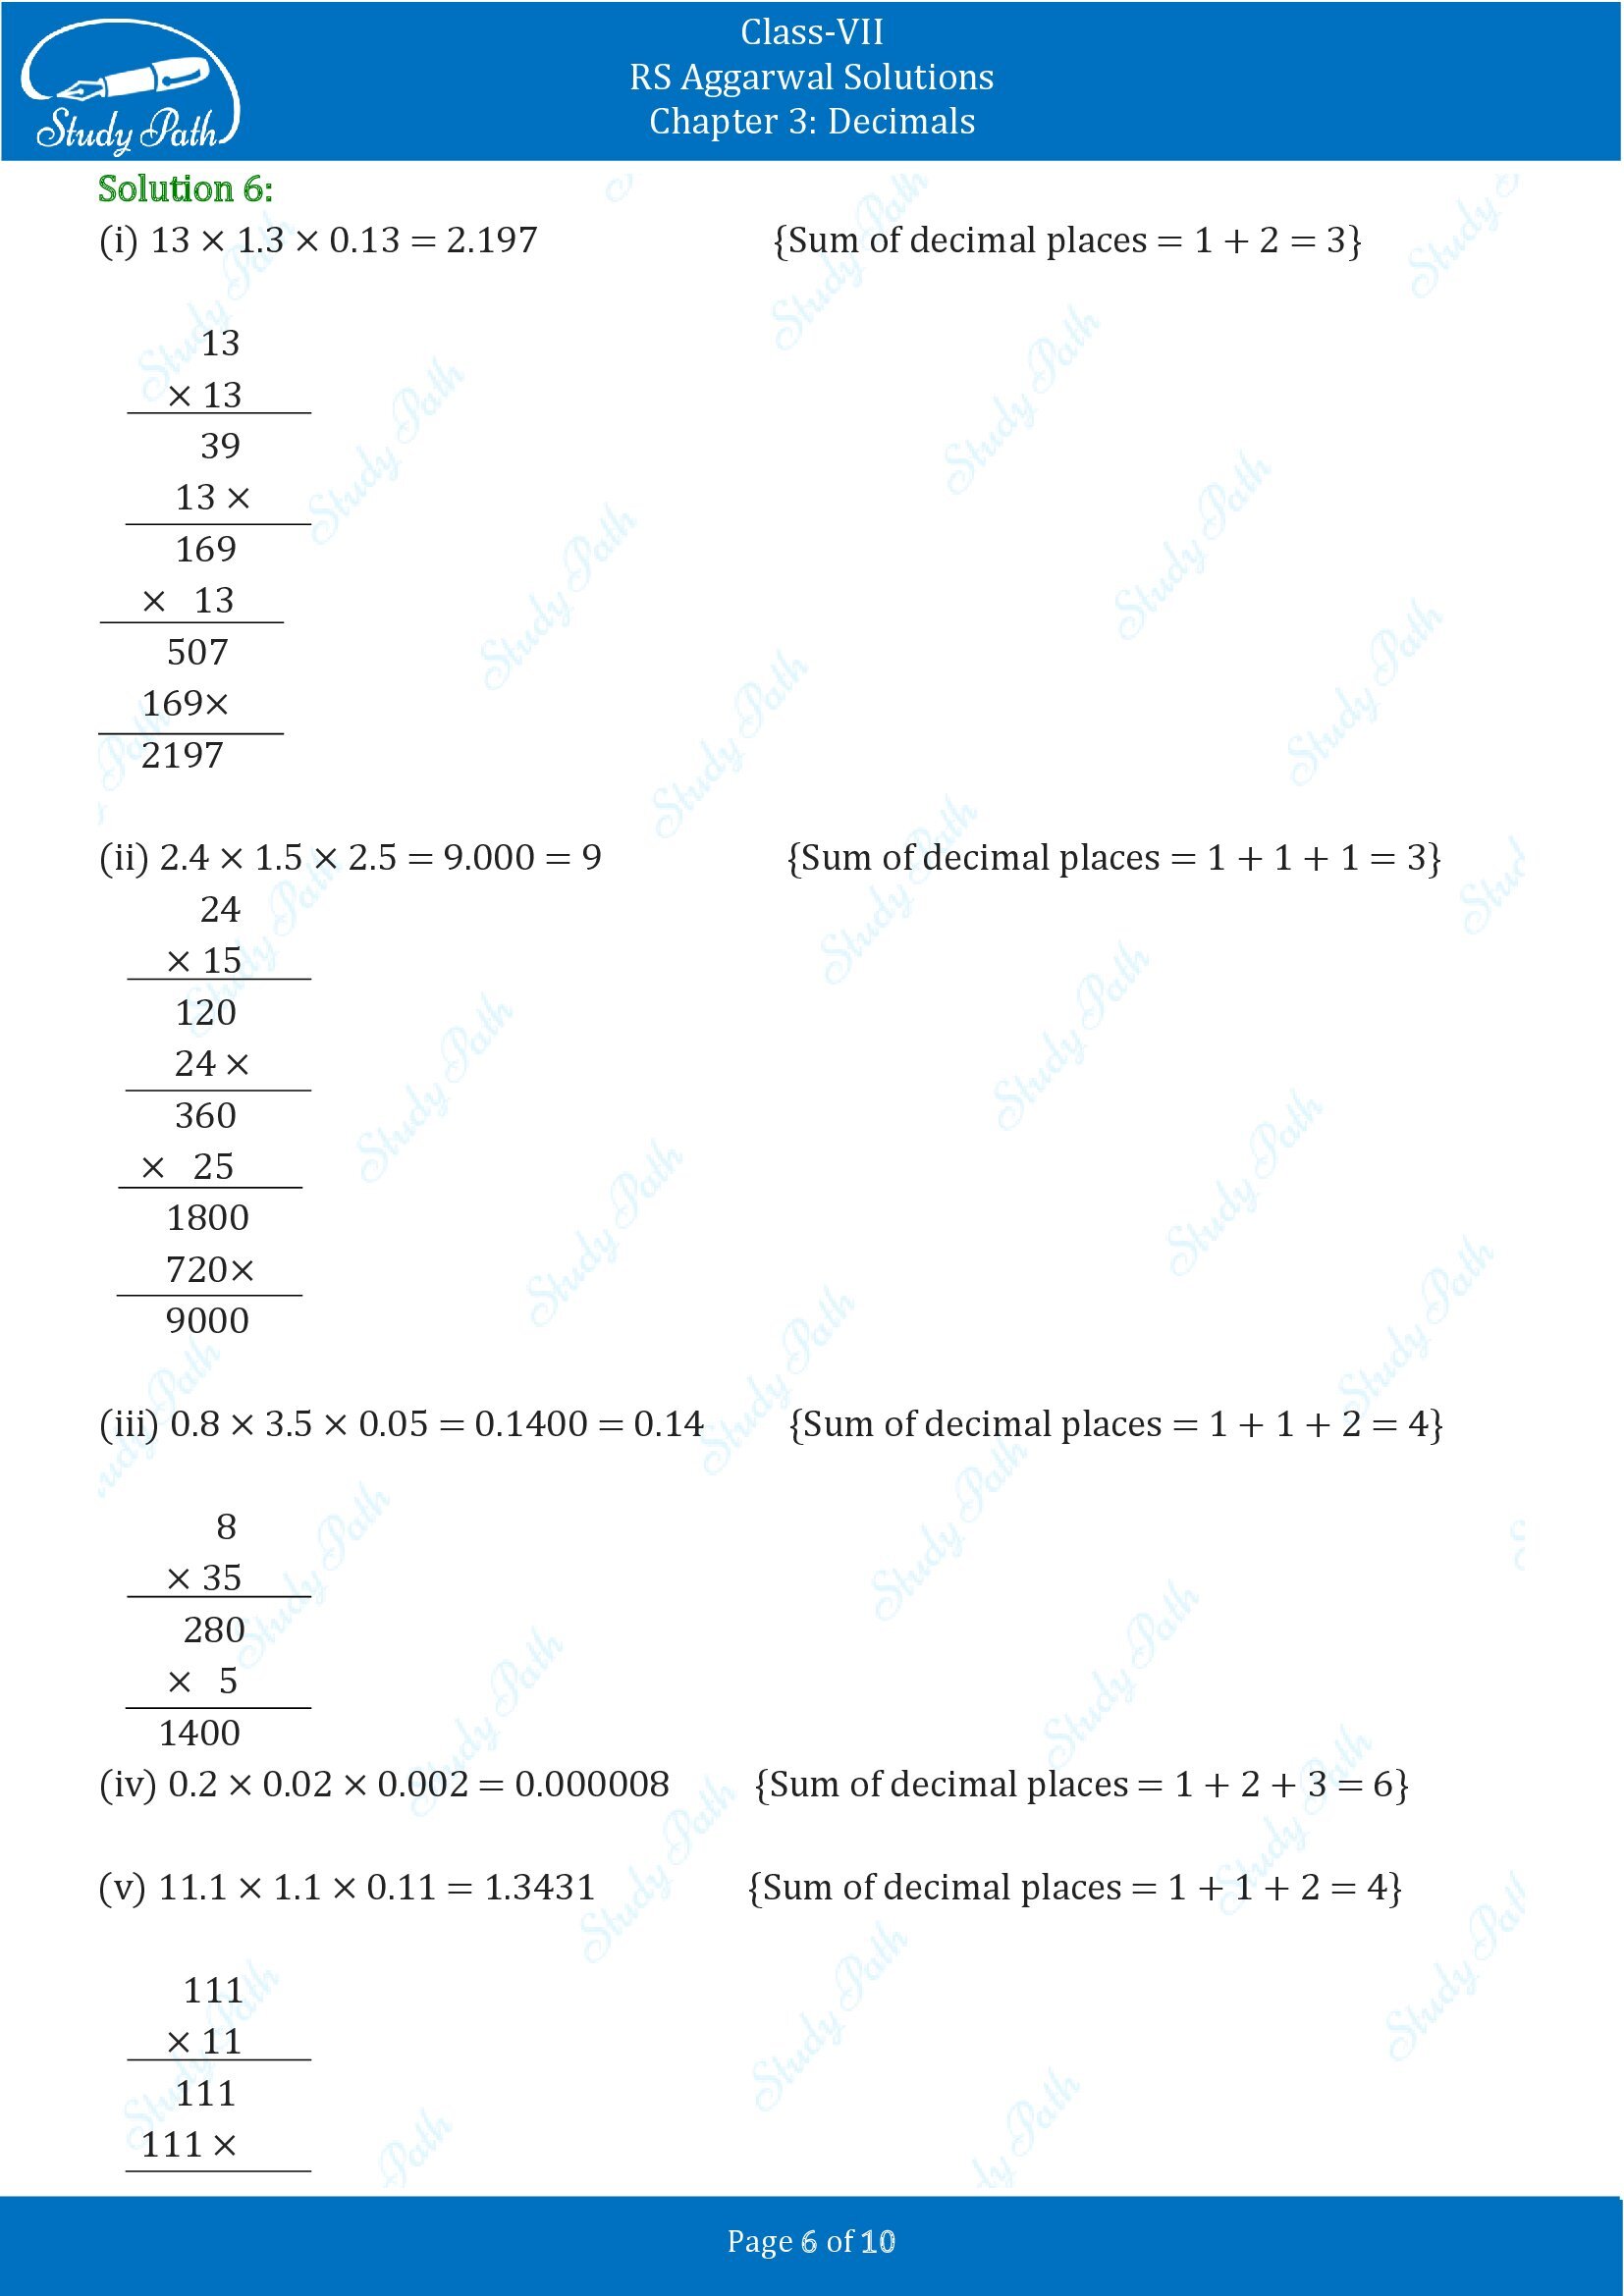 RS Aggarwal Solutions Class 7 Chapter 3 Decimals Exercise 3C 006